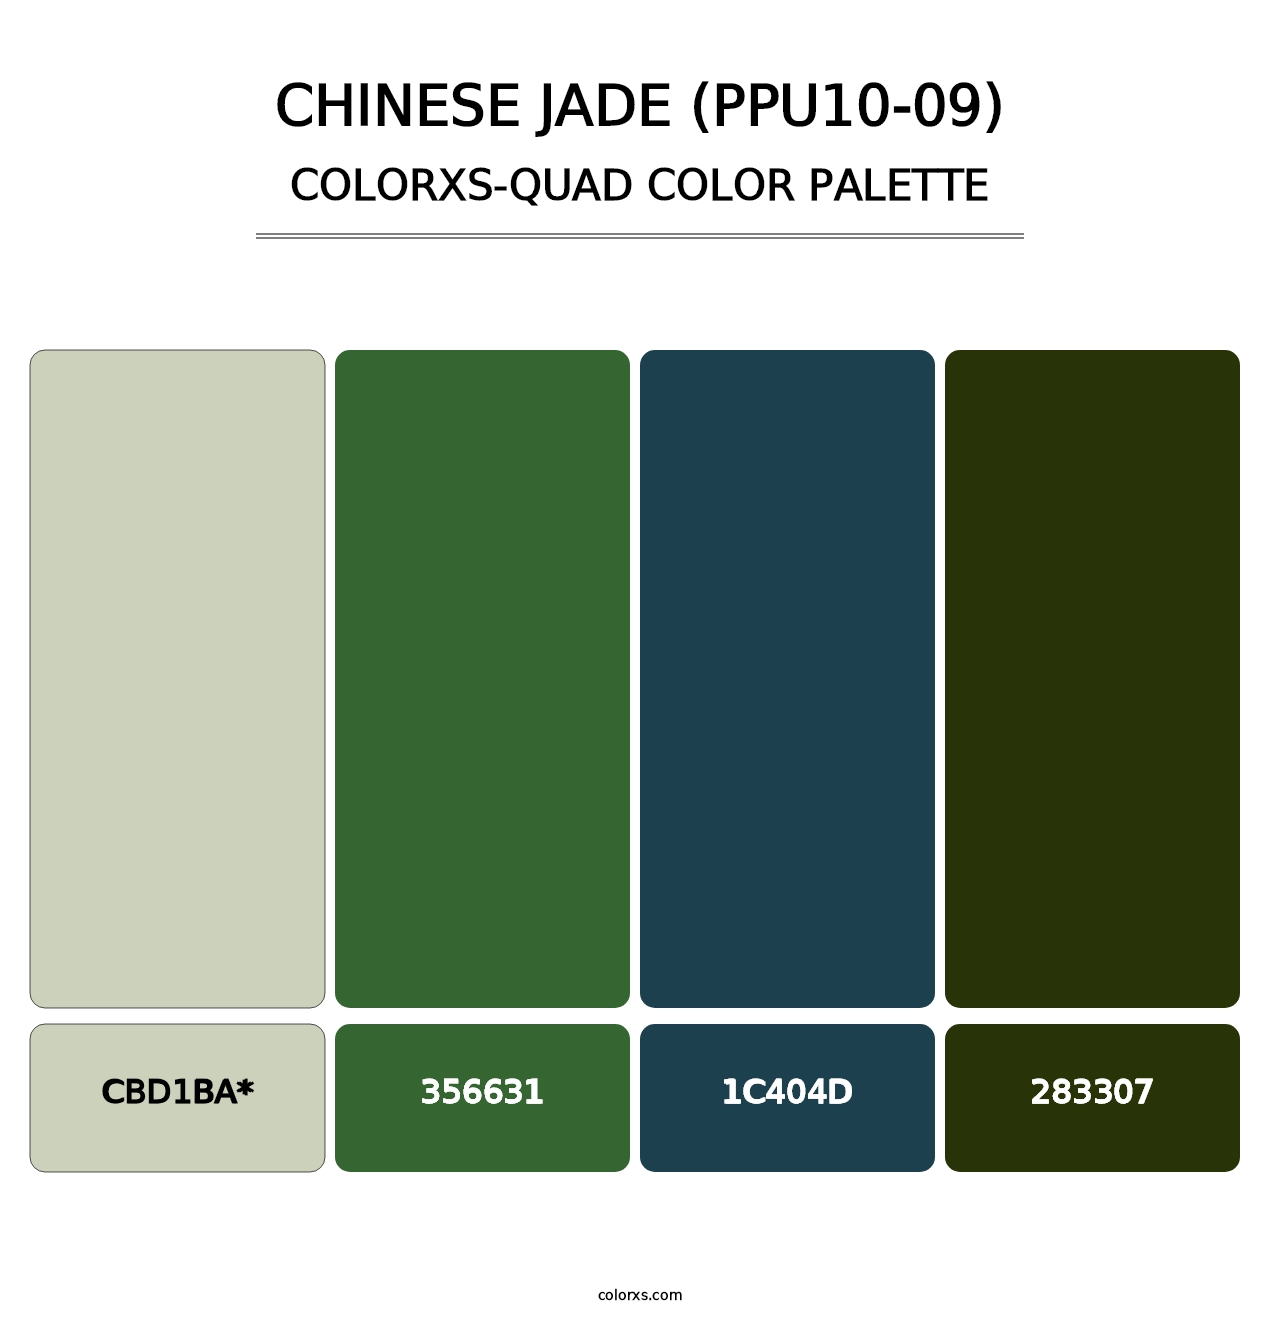 Chinese Jade (PPU10-09) - Colorxs Quad Palette